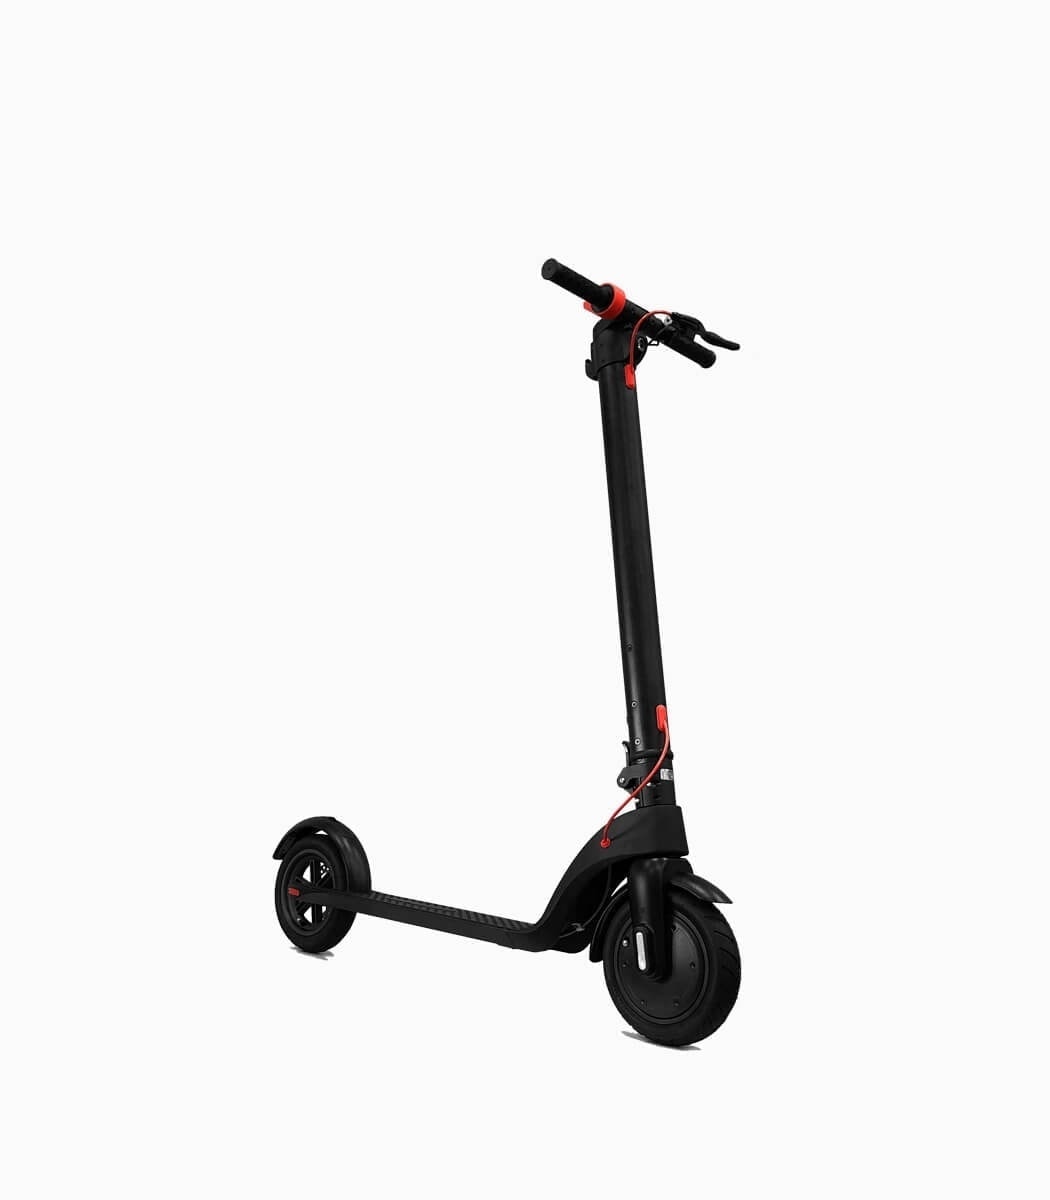 MOBOT X7 (BLACK6.4AH) UL2272 electric scooter angled right